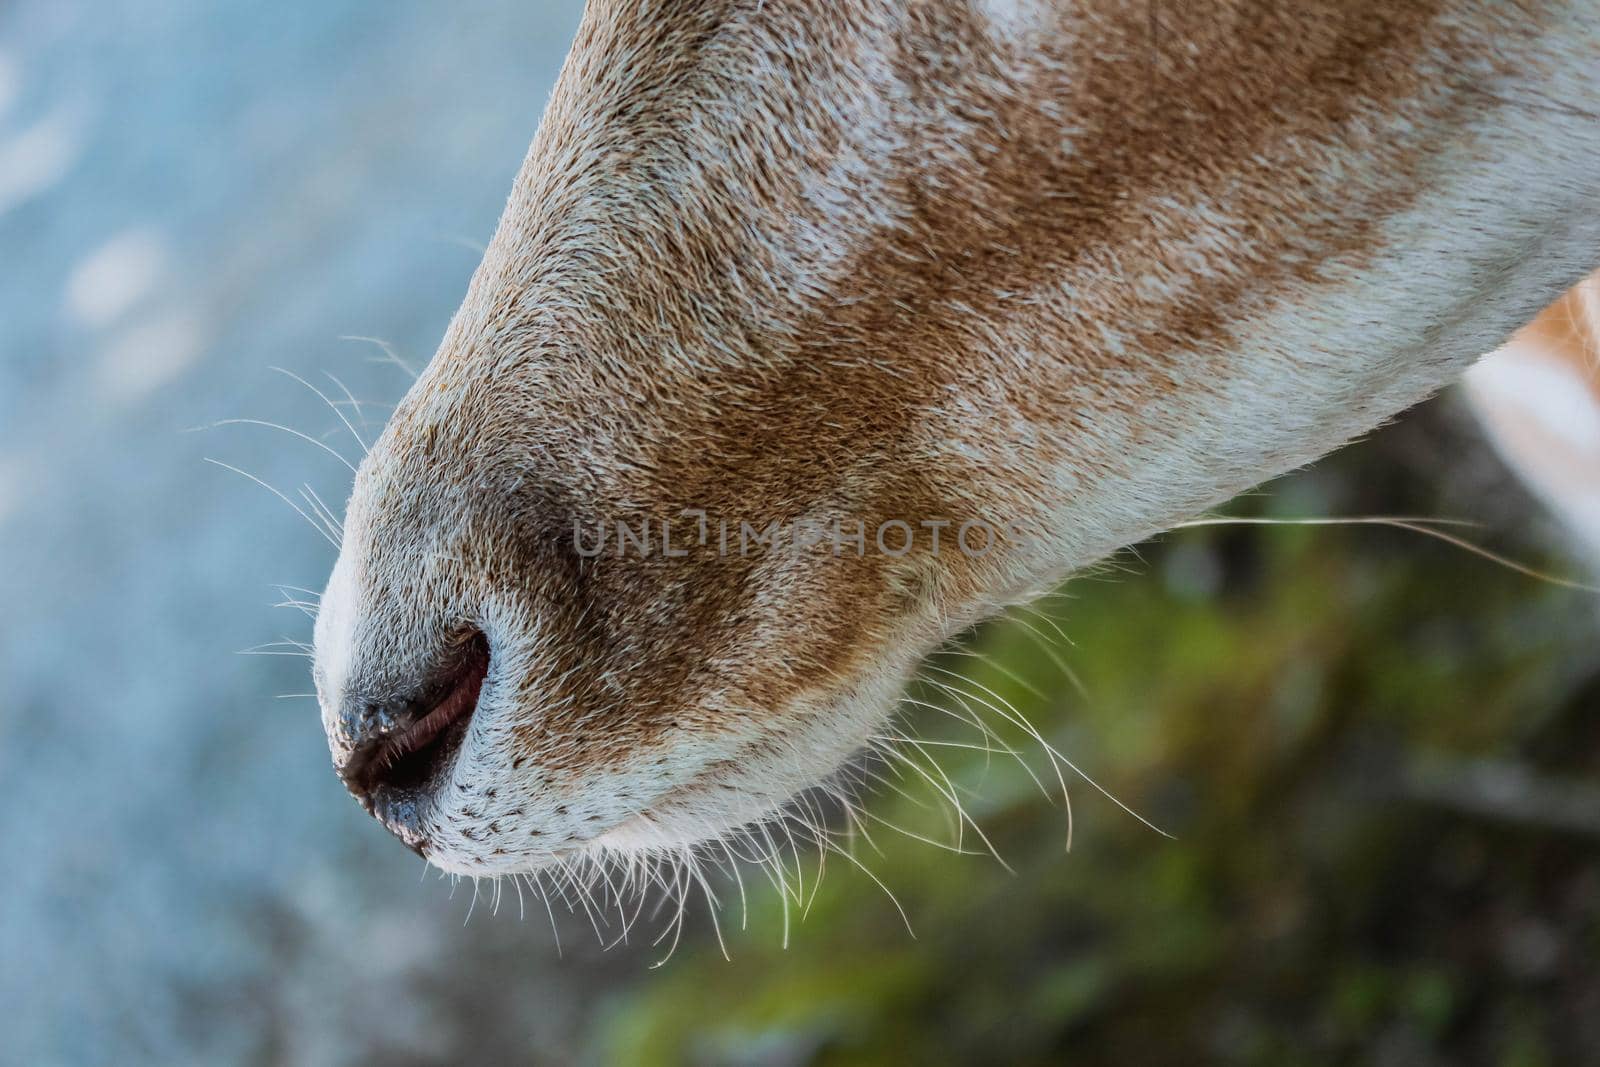 Deer in a farm. Close view of a deer's head and nose by JuliaDorian